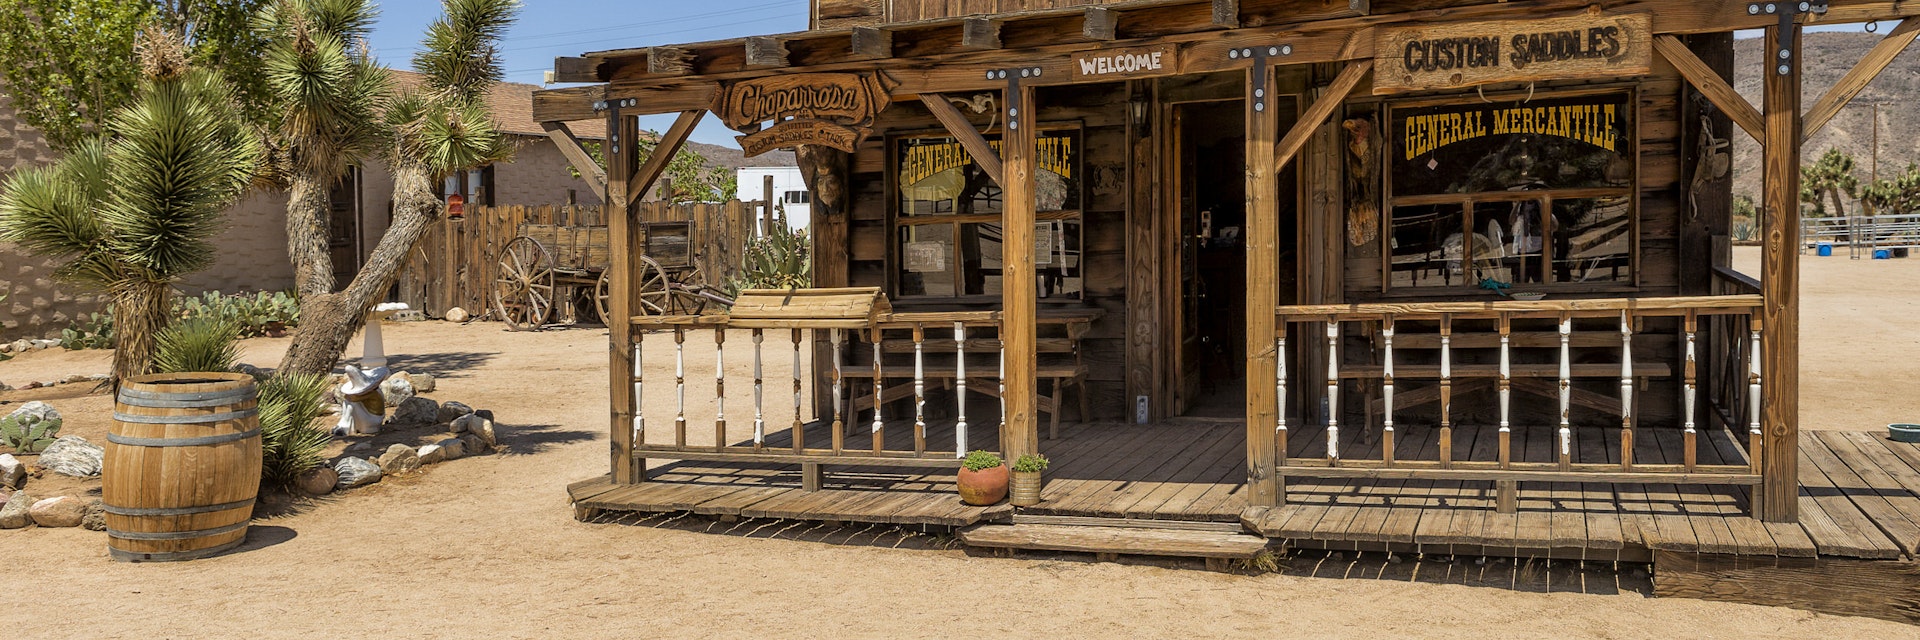 Pioneertown, California - Aug 10 2014: General Mercantile store Mane Street; Shutterstock ID 213837313; Your name (First / Last): Emma Sparks; GL account no.: 65050; Netsuite department name: Online Editorial; Full Product or Project name including edition: Best_in_the_US_POIs